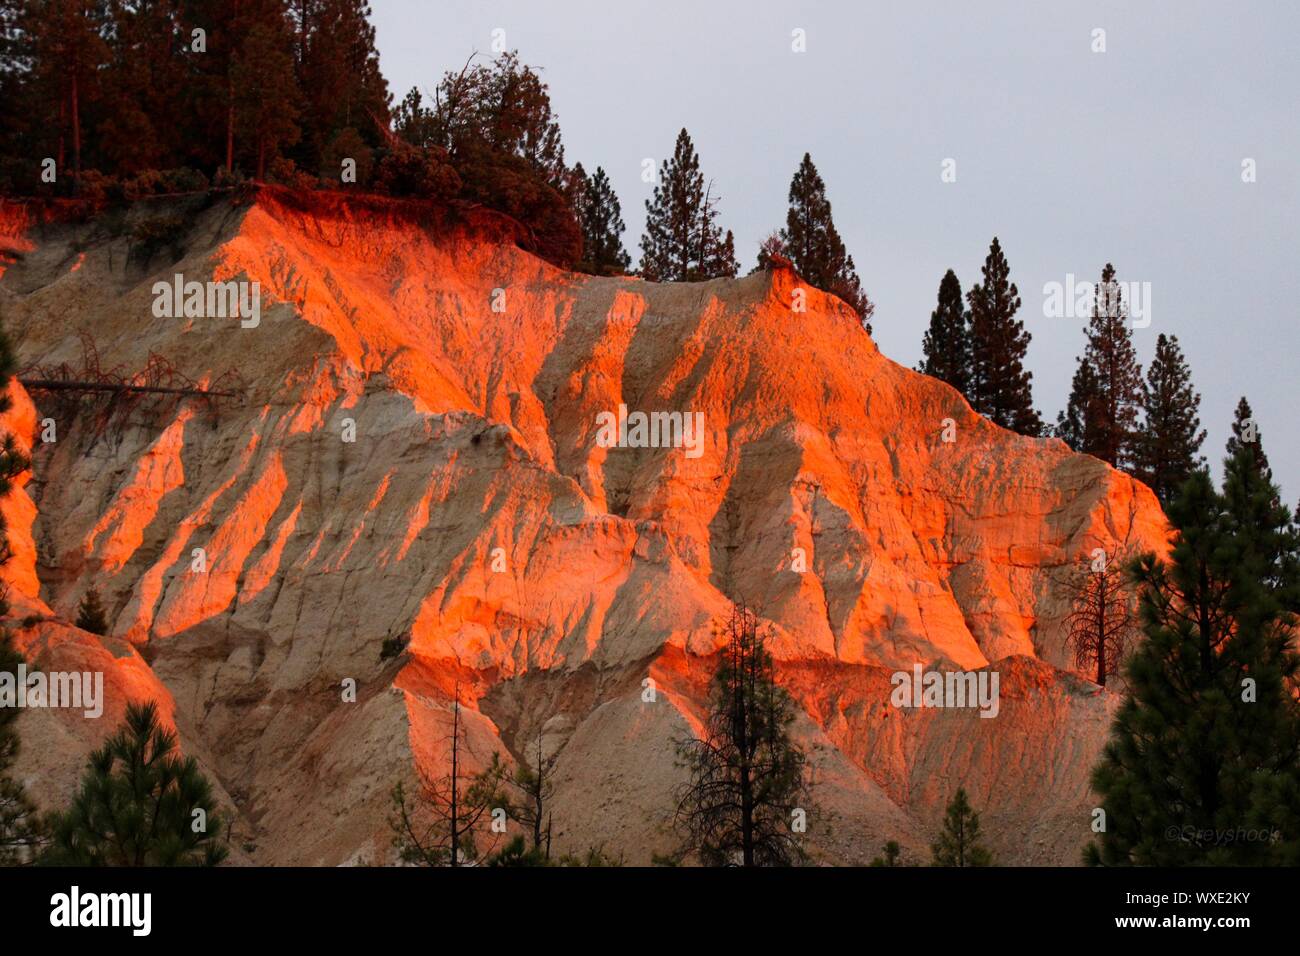 The bluffs from a hydraulic mine in California at sunset. Stock Photo